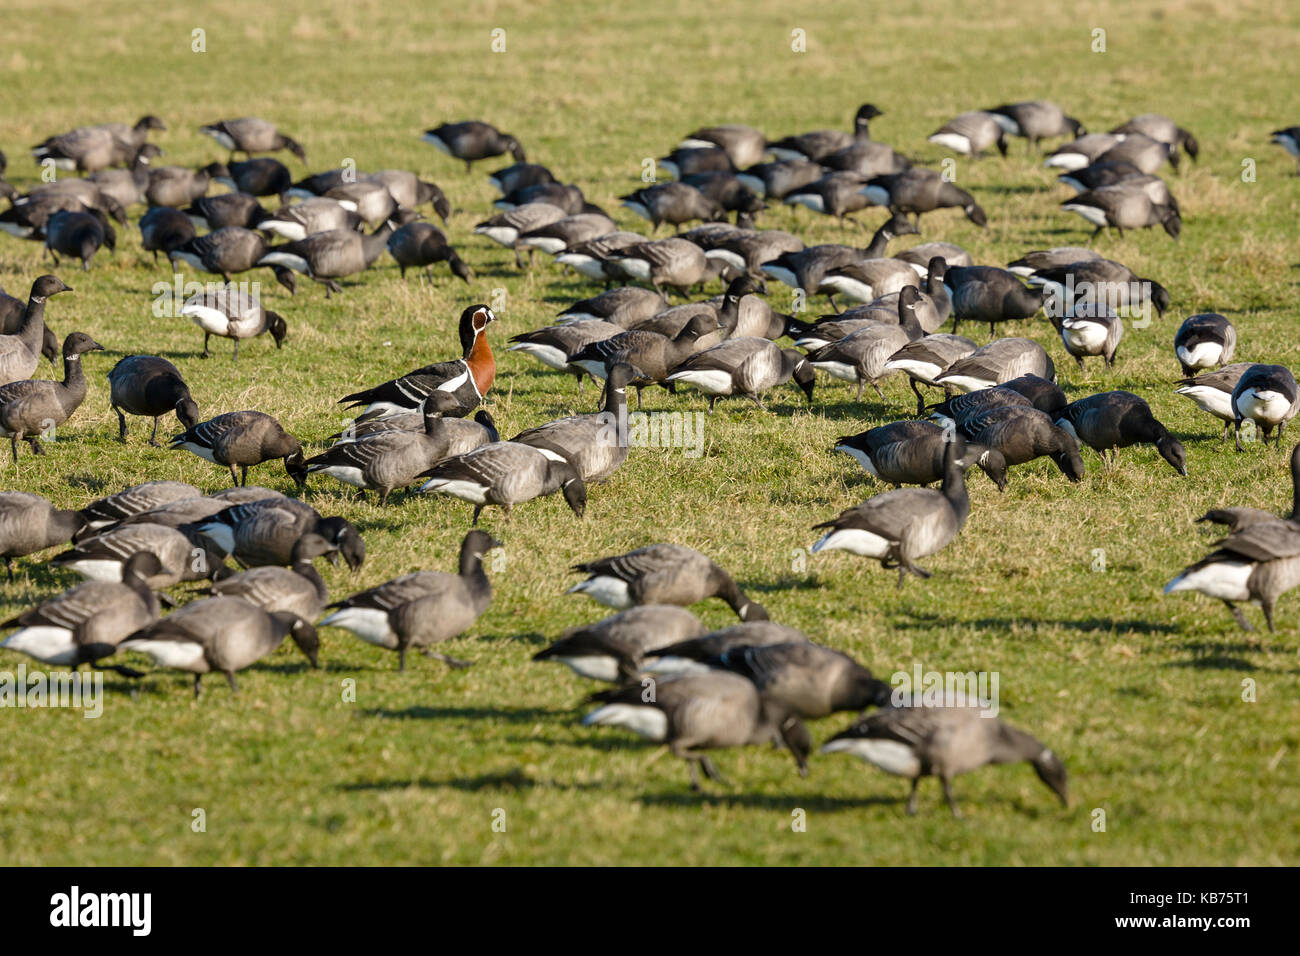 Red-breasted Goose (Branta ruficollis) standing among Brent Geese (Branta bernicla) group in grassland, The Netherlands, Friesland, Lauwersmeer National Park Stock Photo